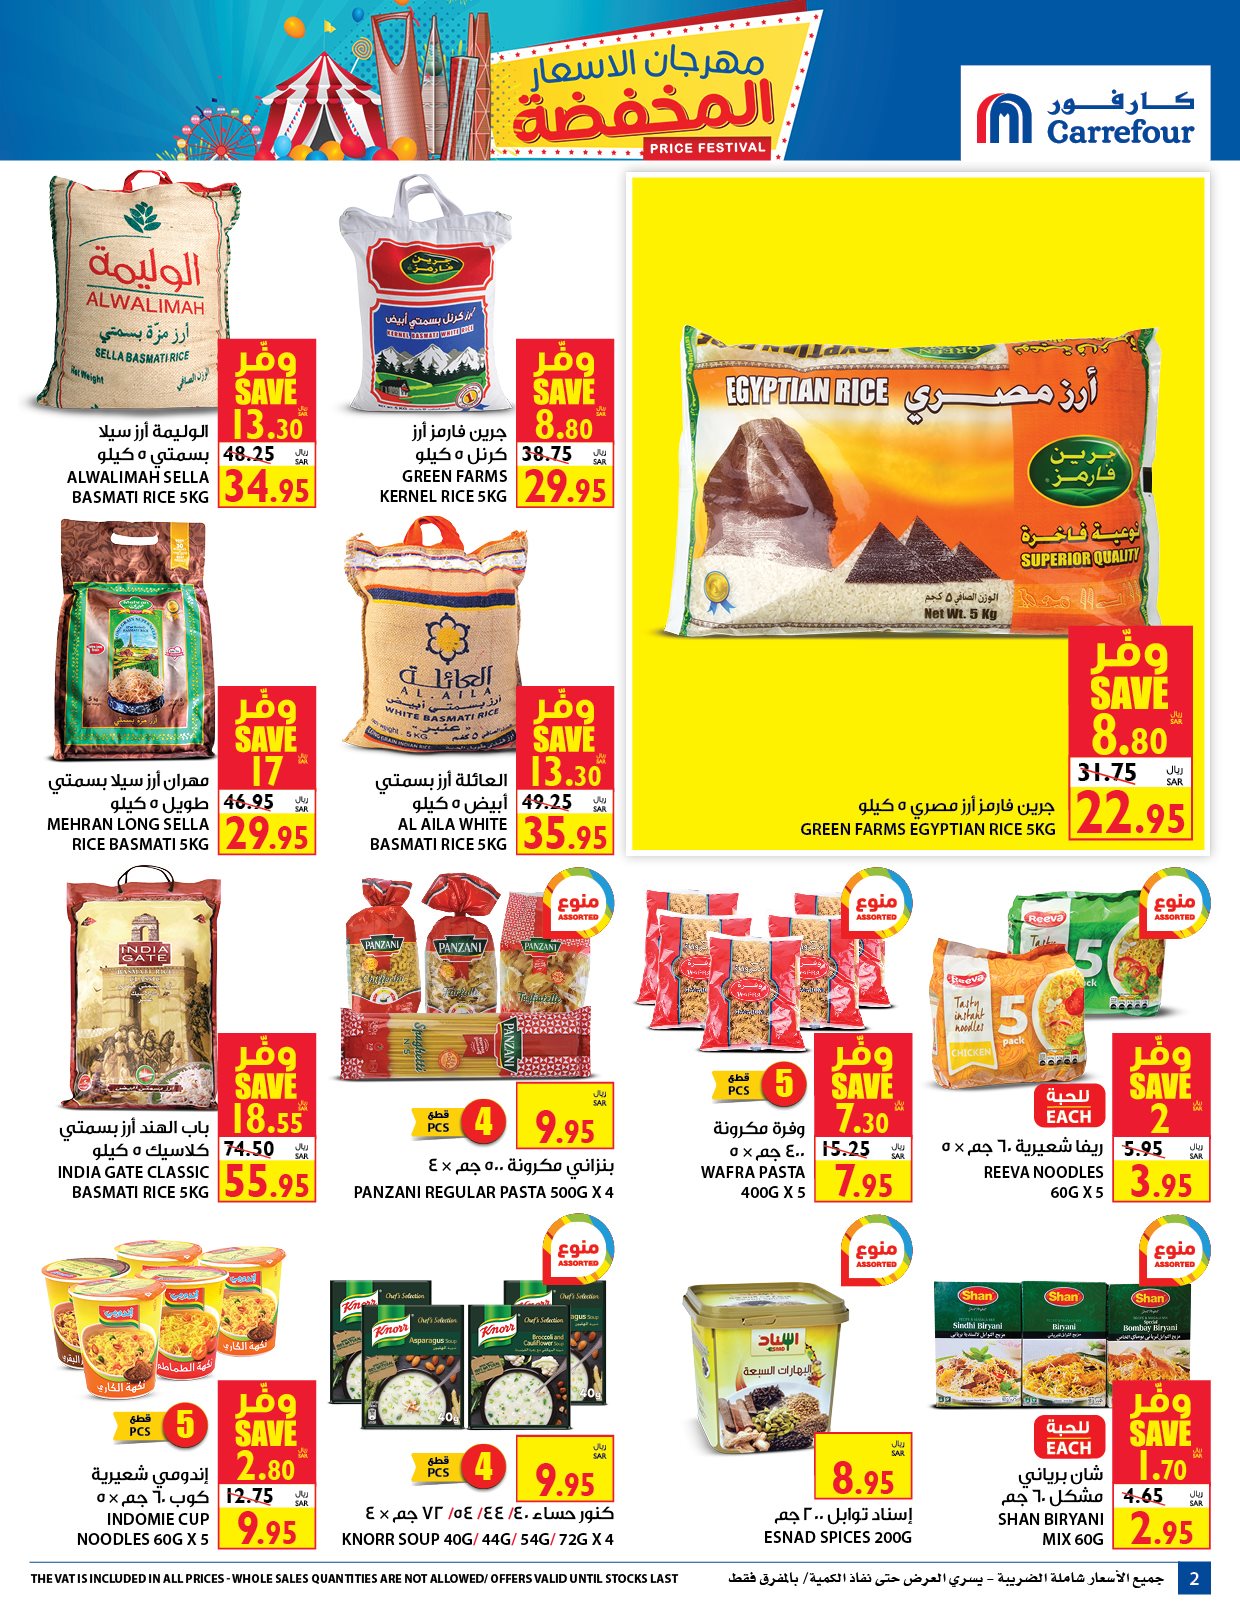 Carrefour Festival Offers from 12/8 till 25/8 | Carrefour KSA 3